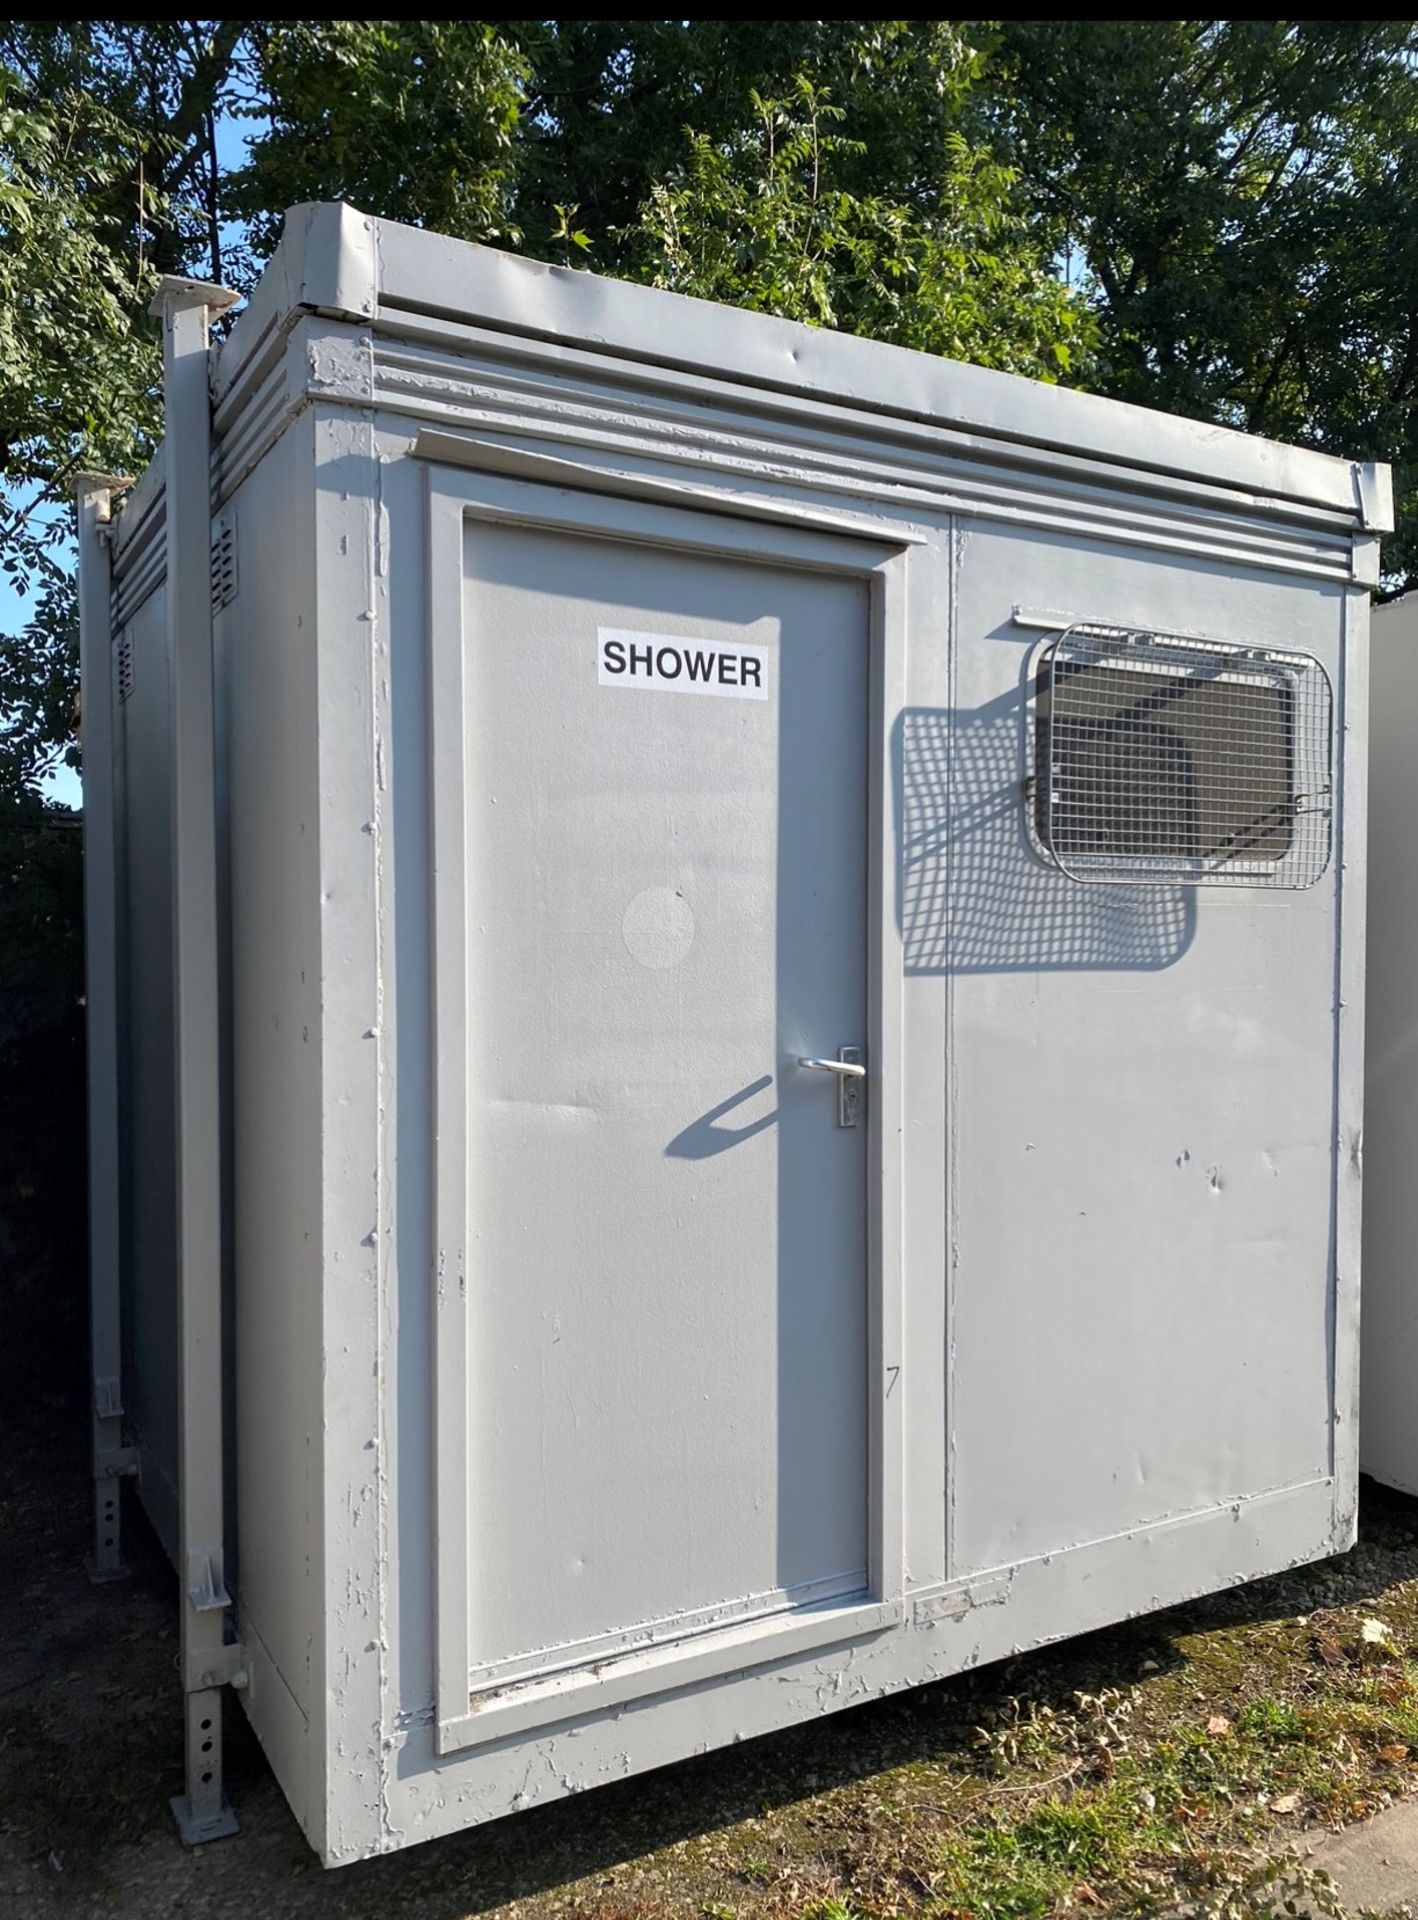 8ft x 8ft twin shower unit cabin with changing area, welfare unit, site cabin, wc block Comes with